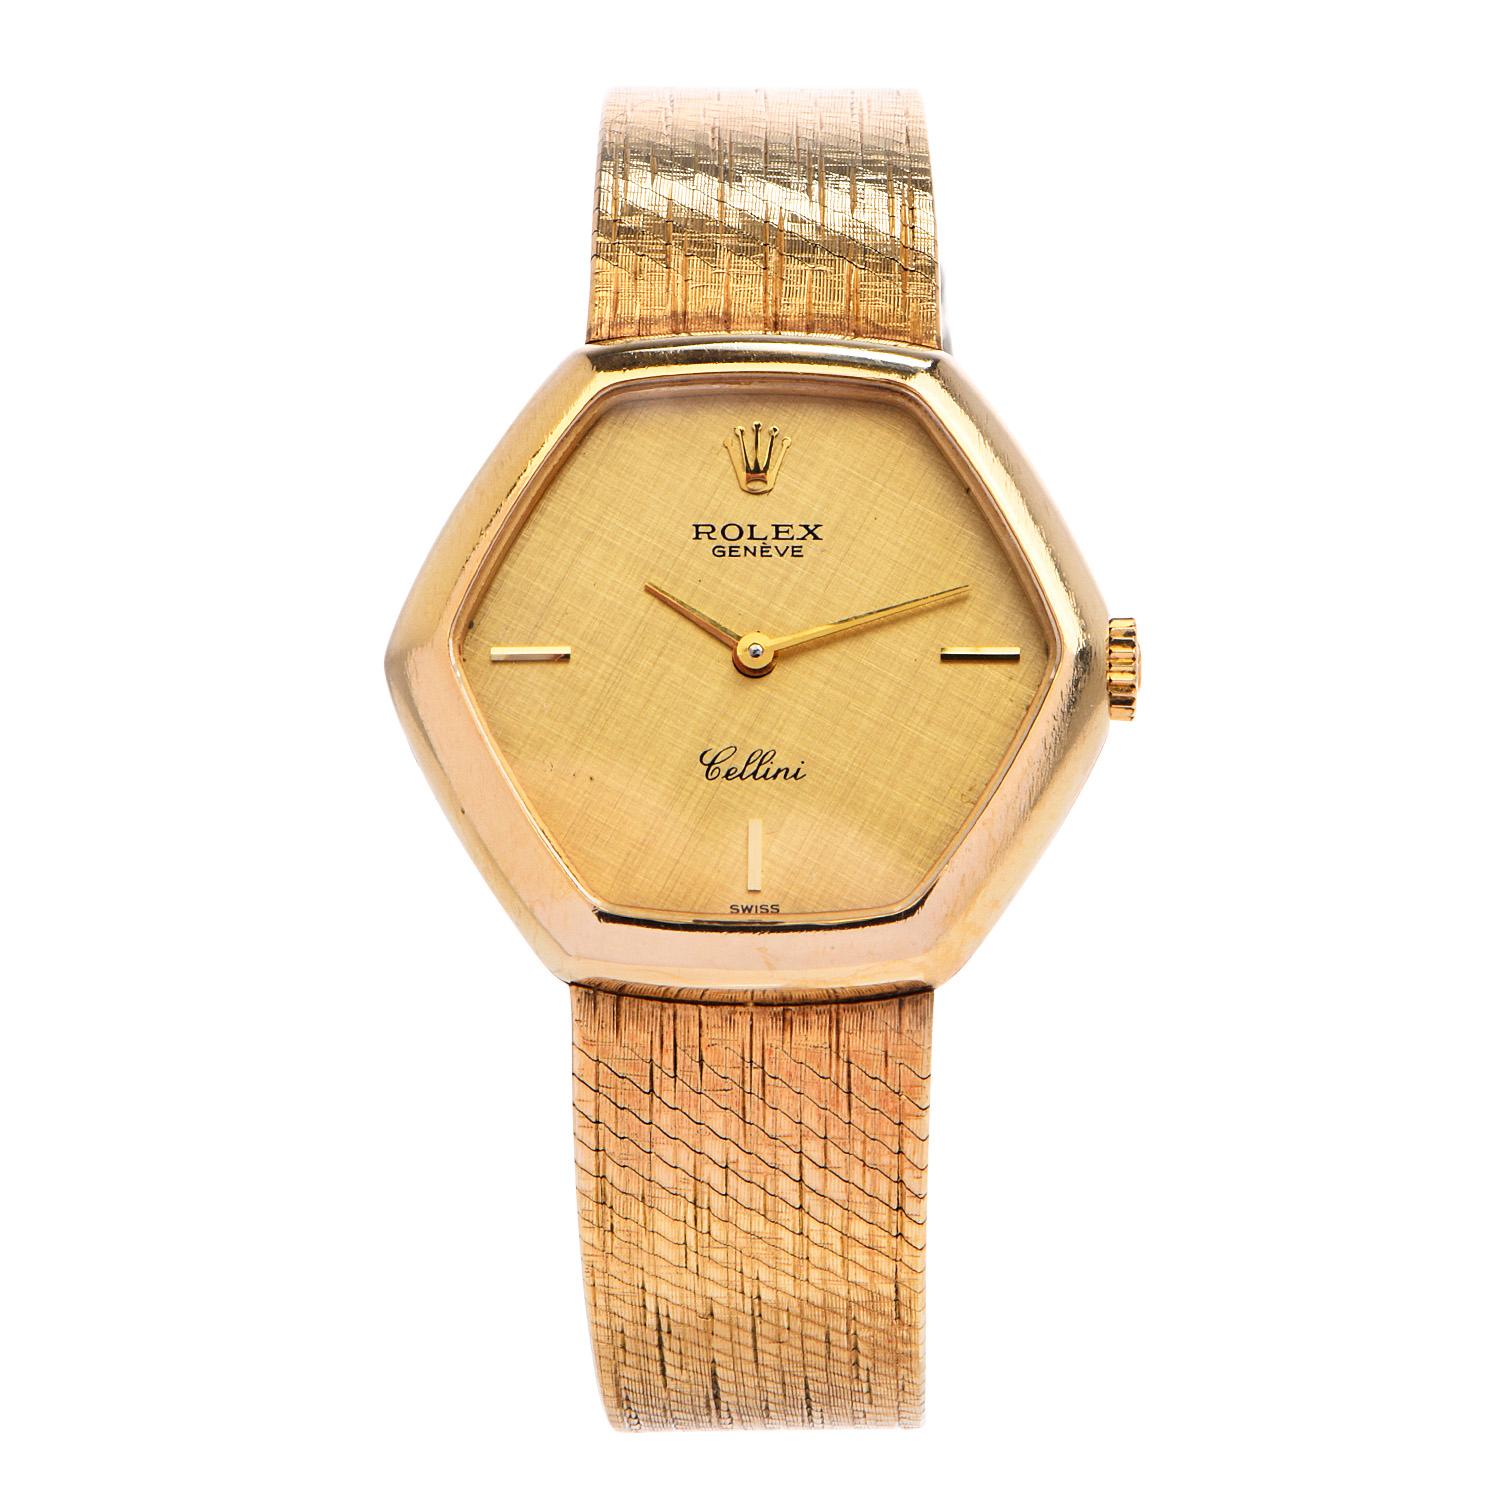 This vintage 1990's Rolex Cellinipiece, is a glimpse of the endless elegance and durability of Rolex.

Crafted in pure 56.4 grams of 18K yellow gold. Featuring a Hexagonal shaped case, with glass top crystal, golden tone dial, hands, and marker